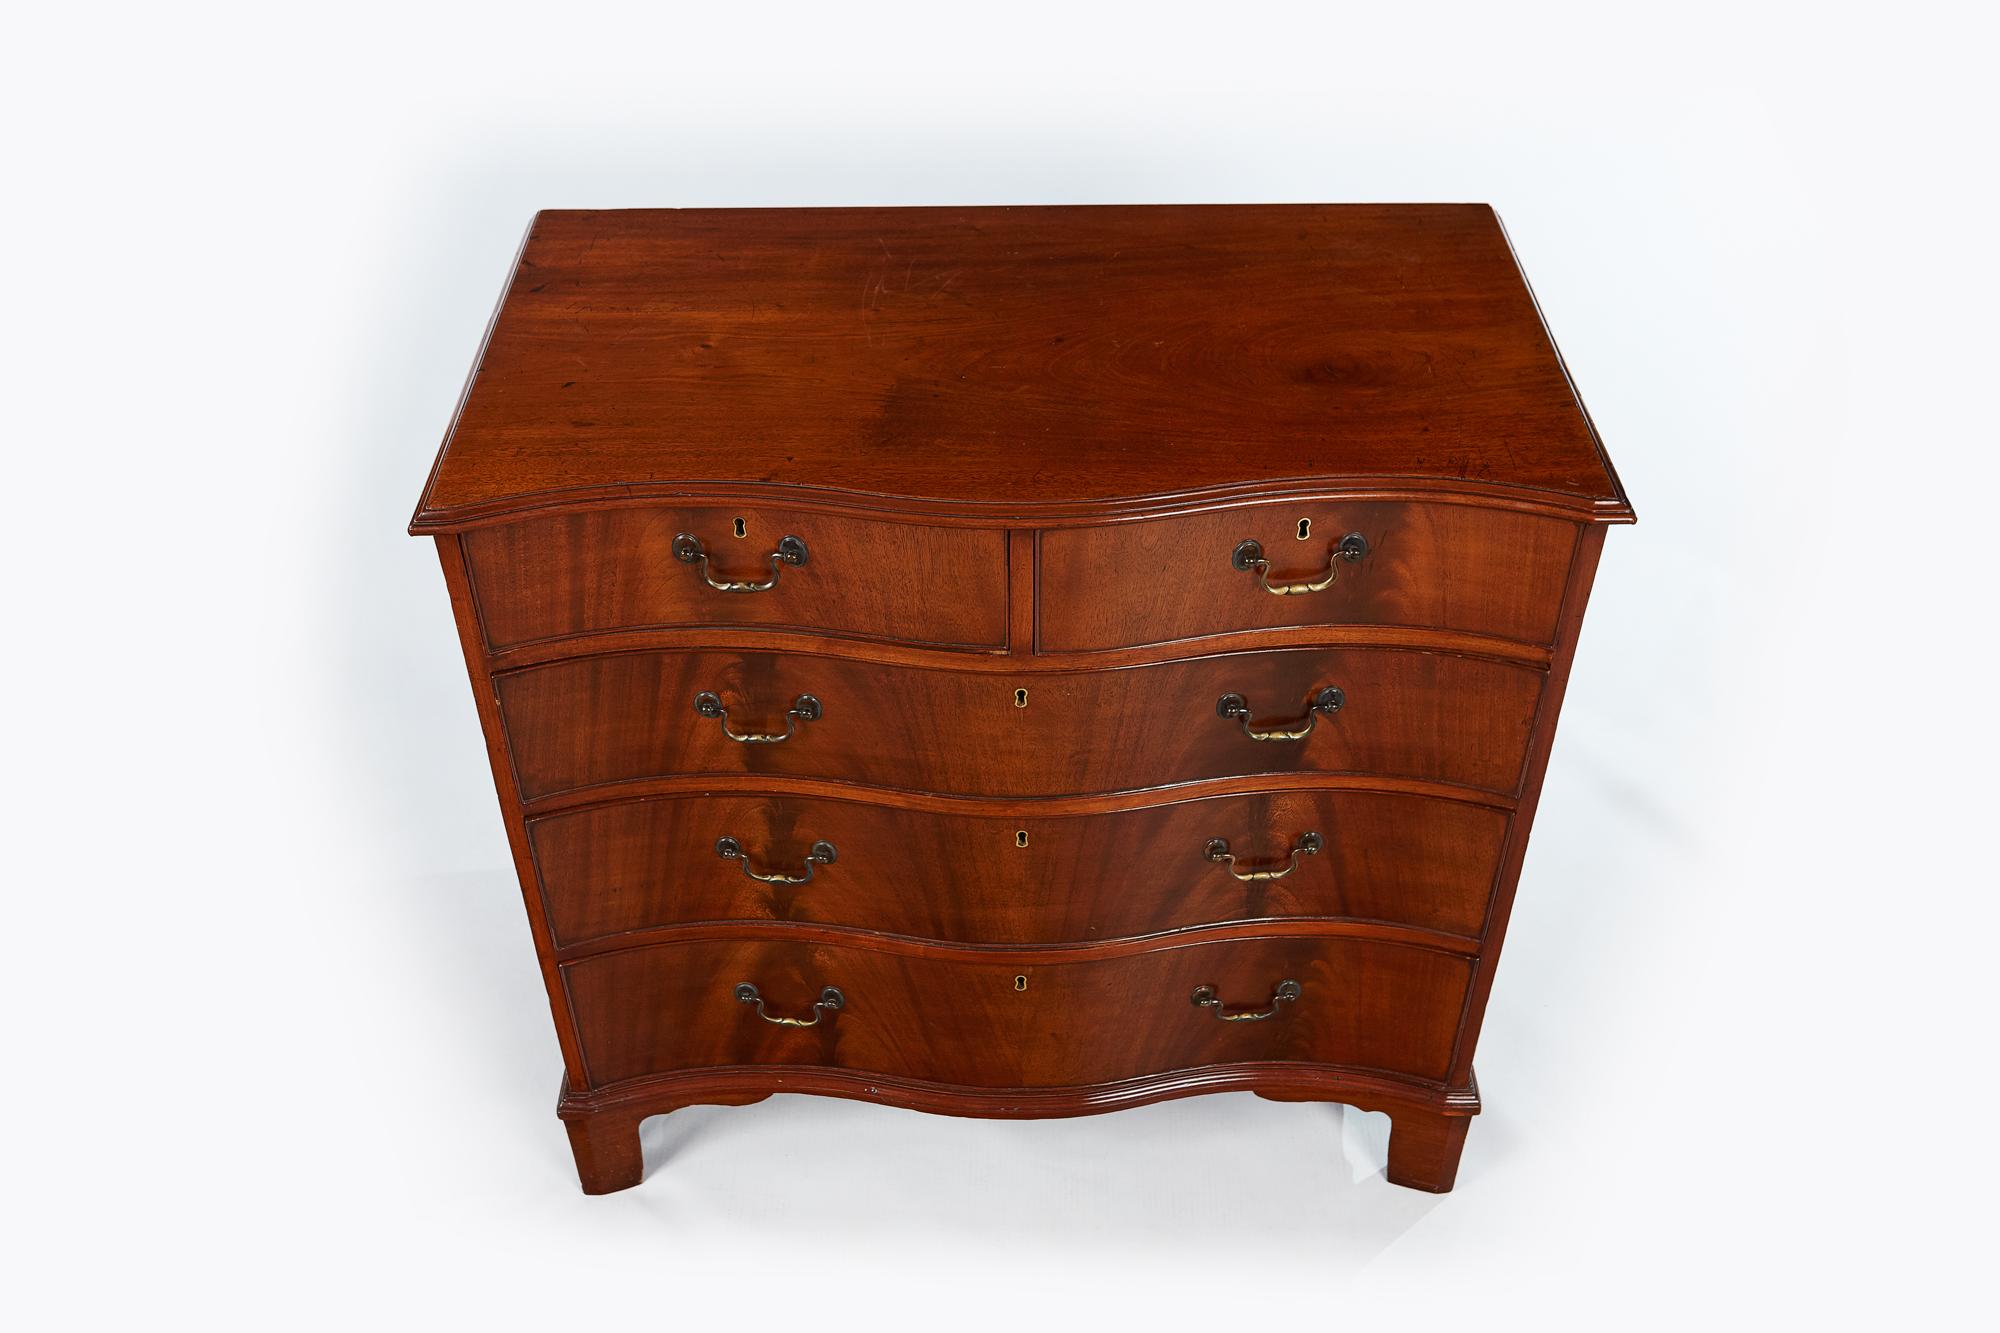 19th century mahogany serpentine chest of drawers with two small and three long graduated drawers with brass pulls supported on four bracket feet.